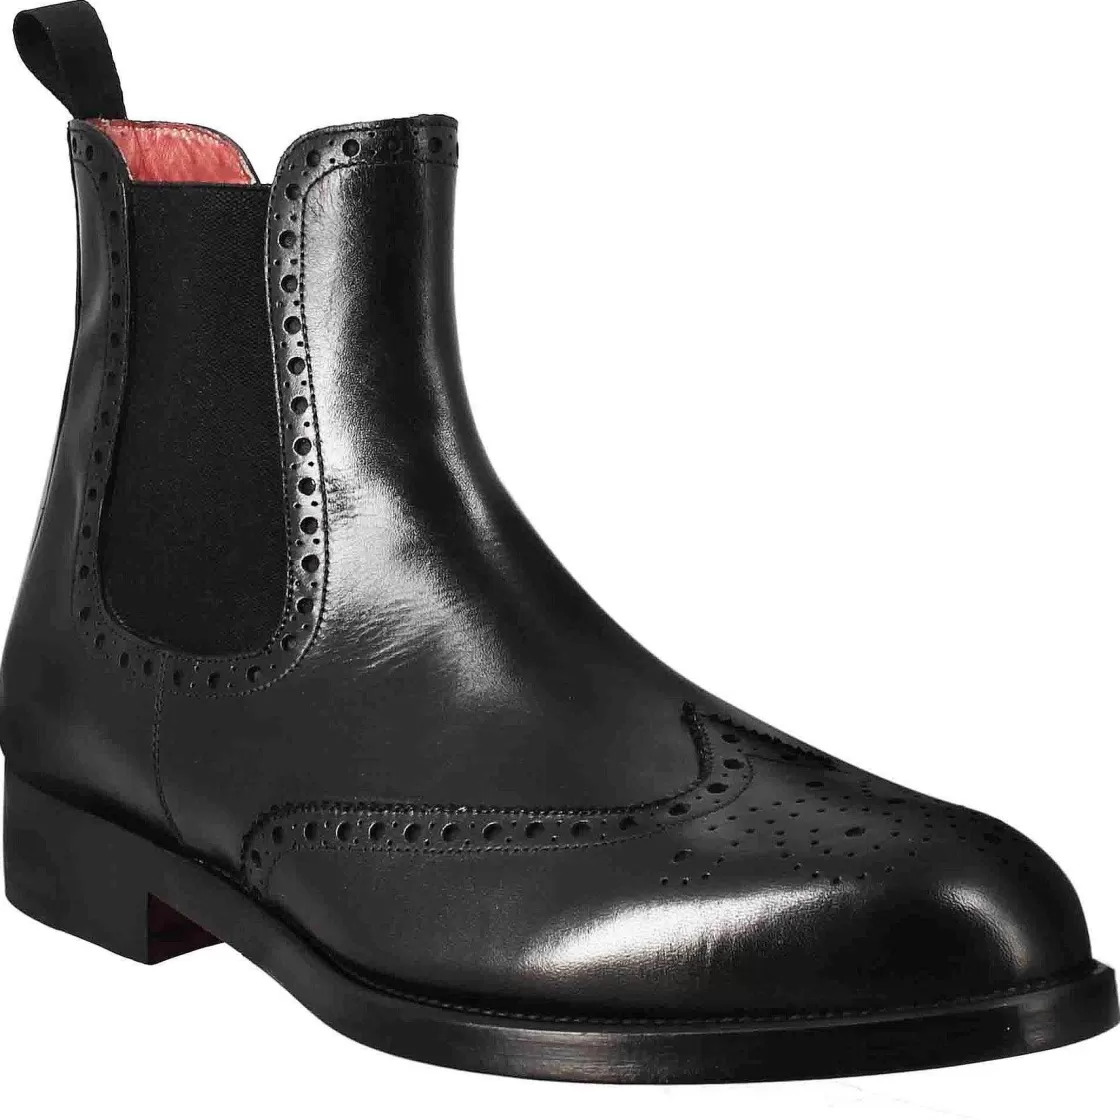 Leonardo Chelsea Boot With Brogue Details For Men In Black Leather With Elastic Shop